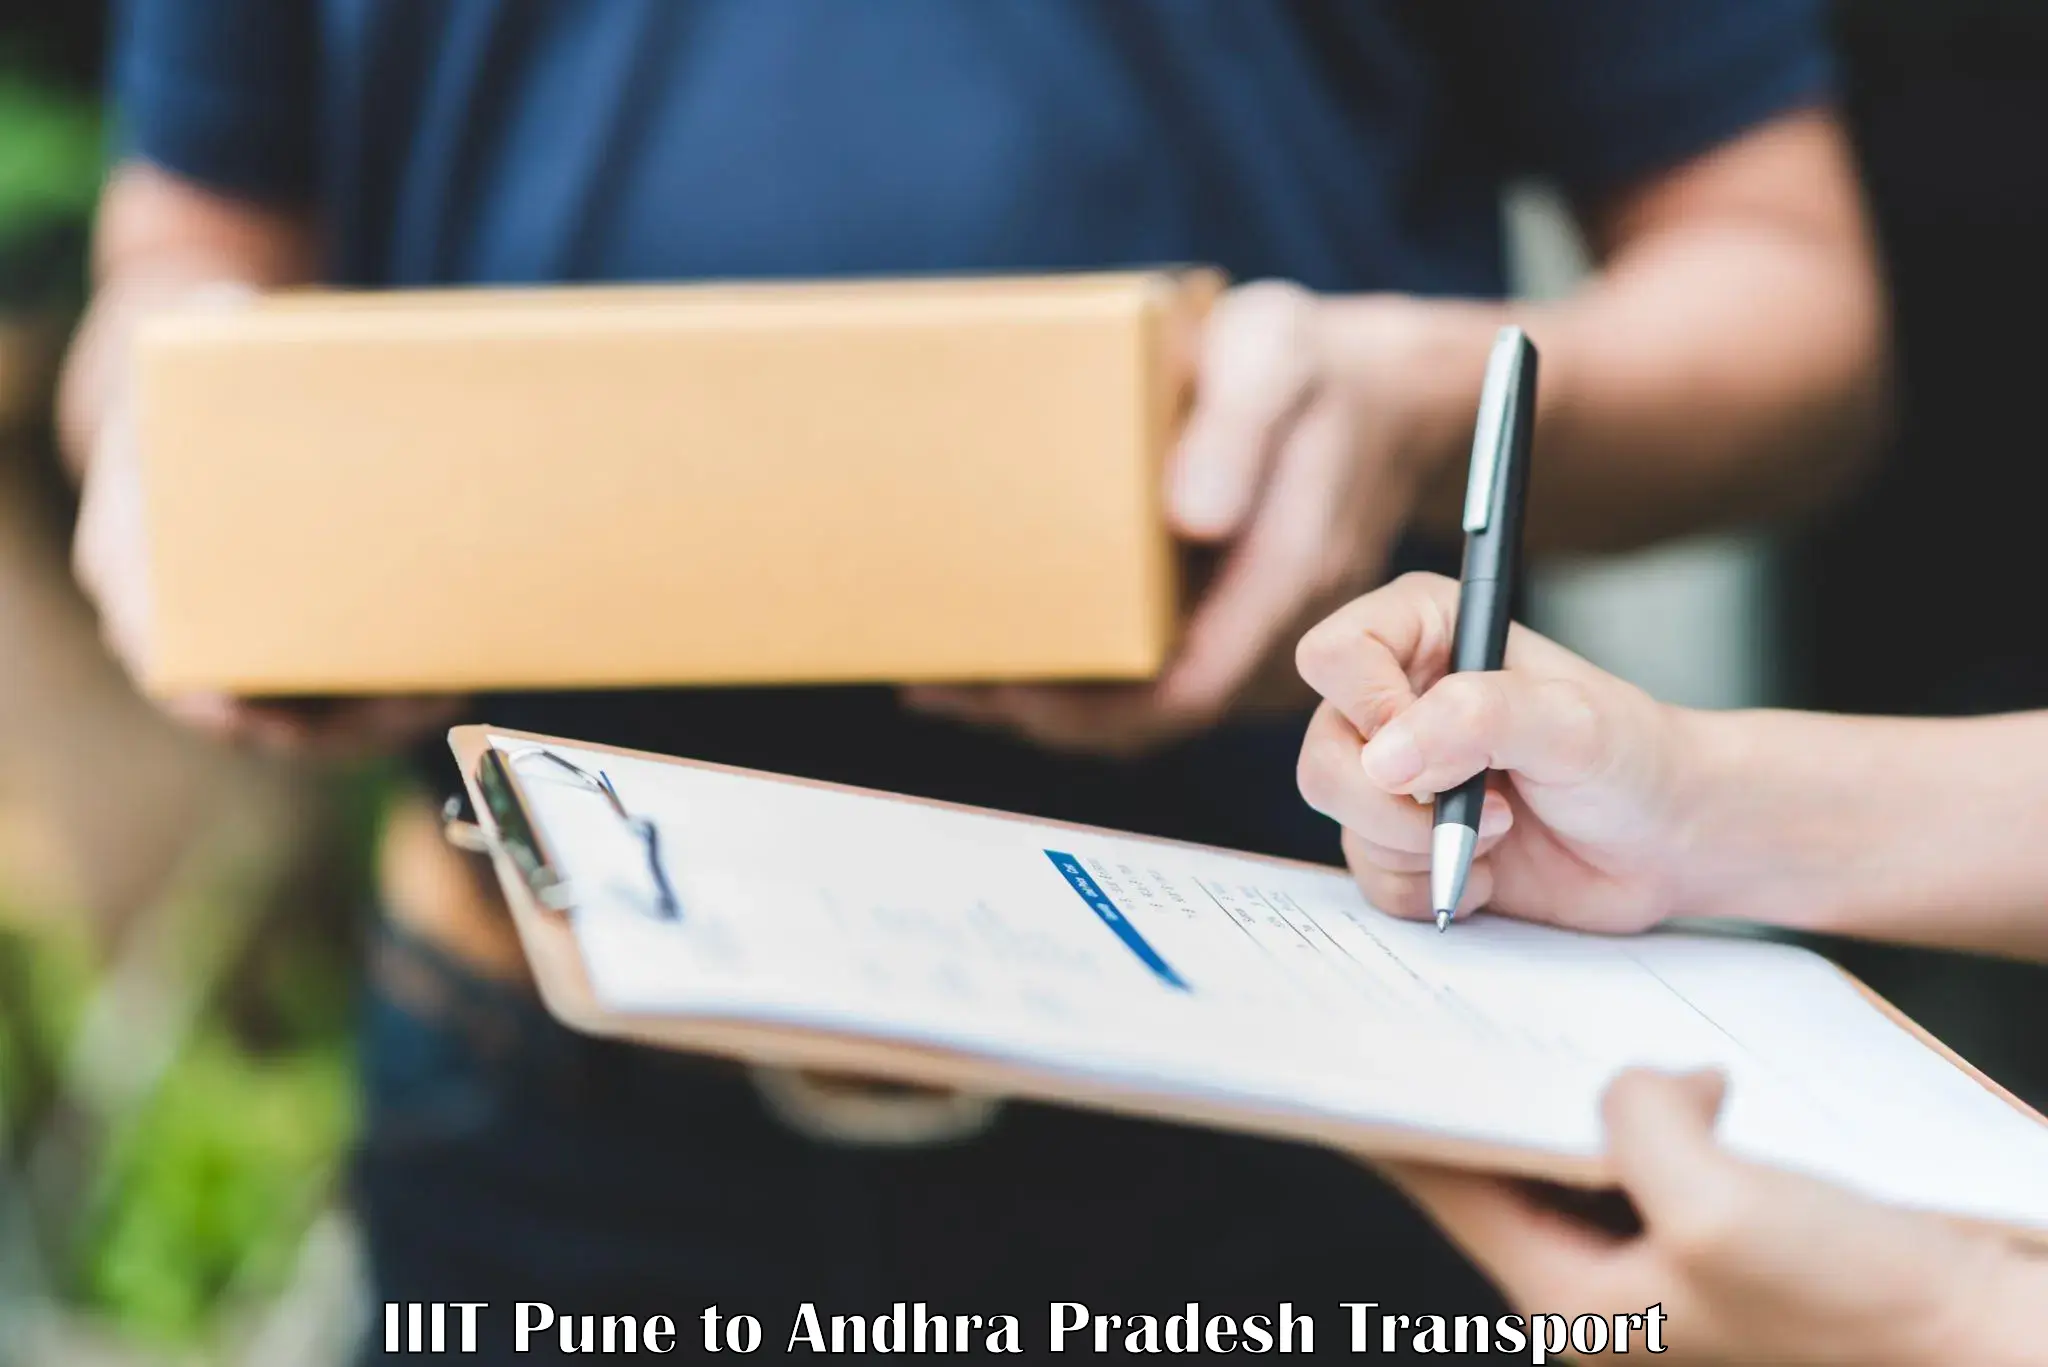 Container transport service IIIT Pune to NIT Andhra Pradesh